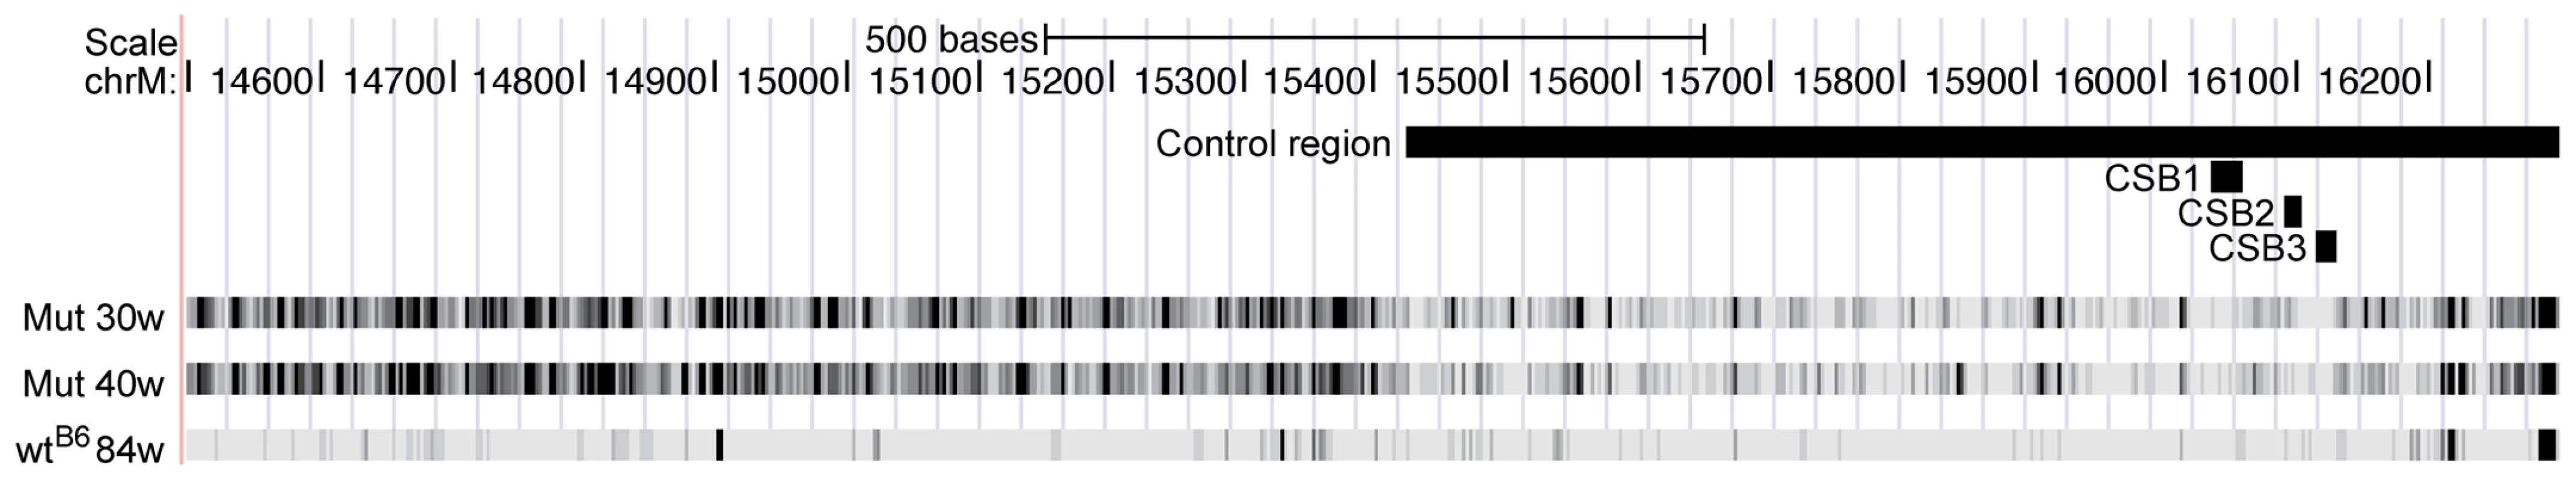 Mutation frequencies for the two mtDNA mutator mice (Mut 30w and Mut 40w) and the C57Bl/6N 84-week-old mouse (wt<sup>B6</sup>) in a region including the control region.